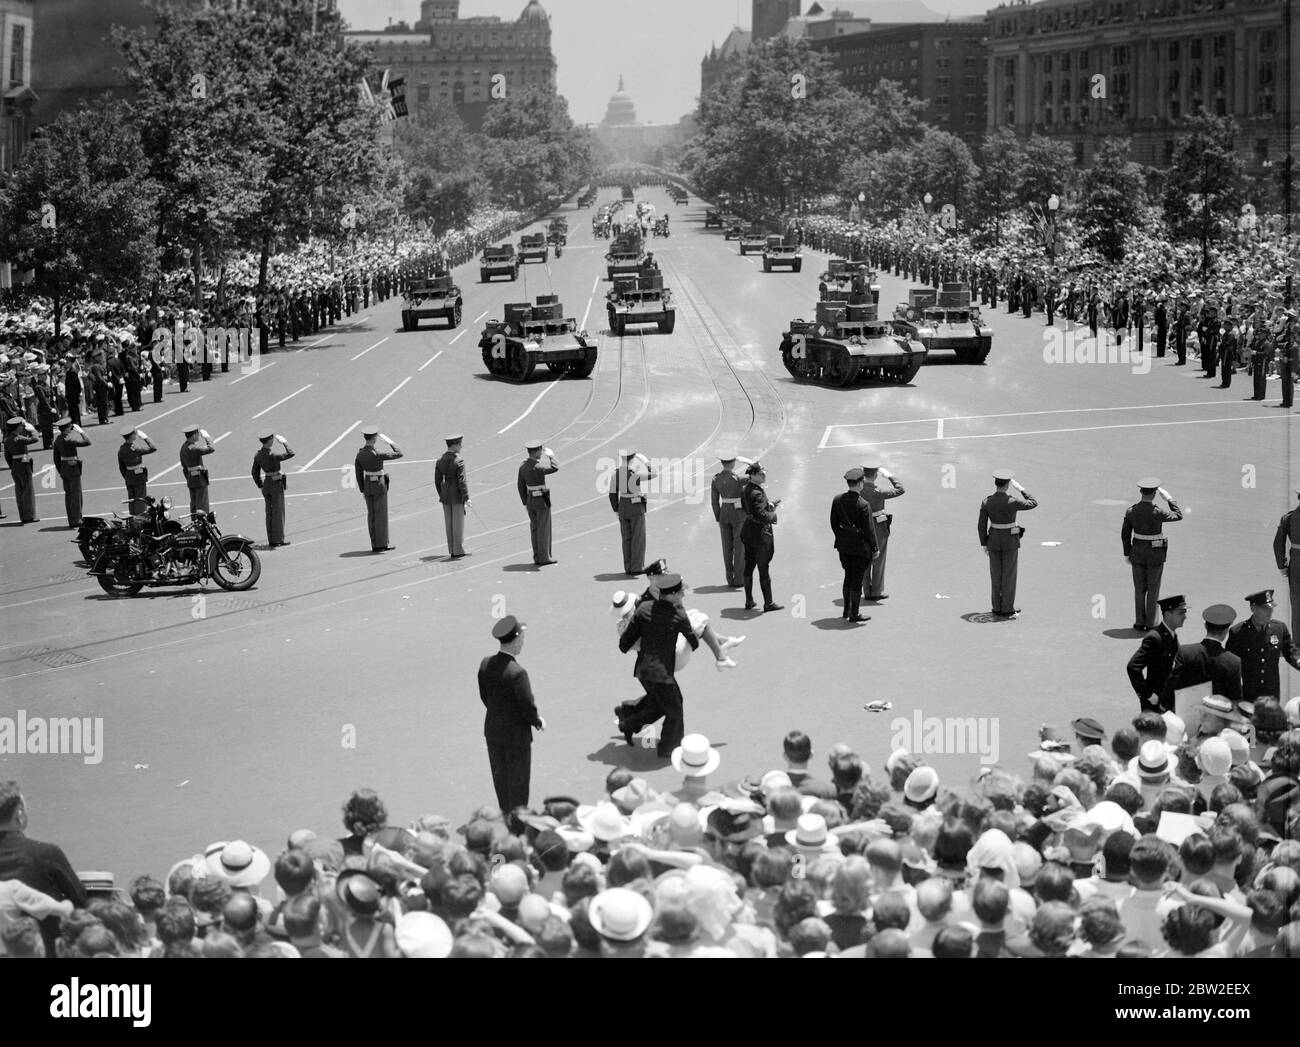 The Royal tour of Canada and the USA by King George VI and Queen Elizabeth , 1939 The King and Queen welcomed in Washington , the capital of the United States . The military procession passed up Pennsylvania Avenue on the way to the White House . The terrific heat caused hundreds people to collapse and a woman is carried away by police . Stock Photo